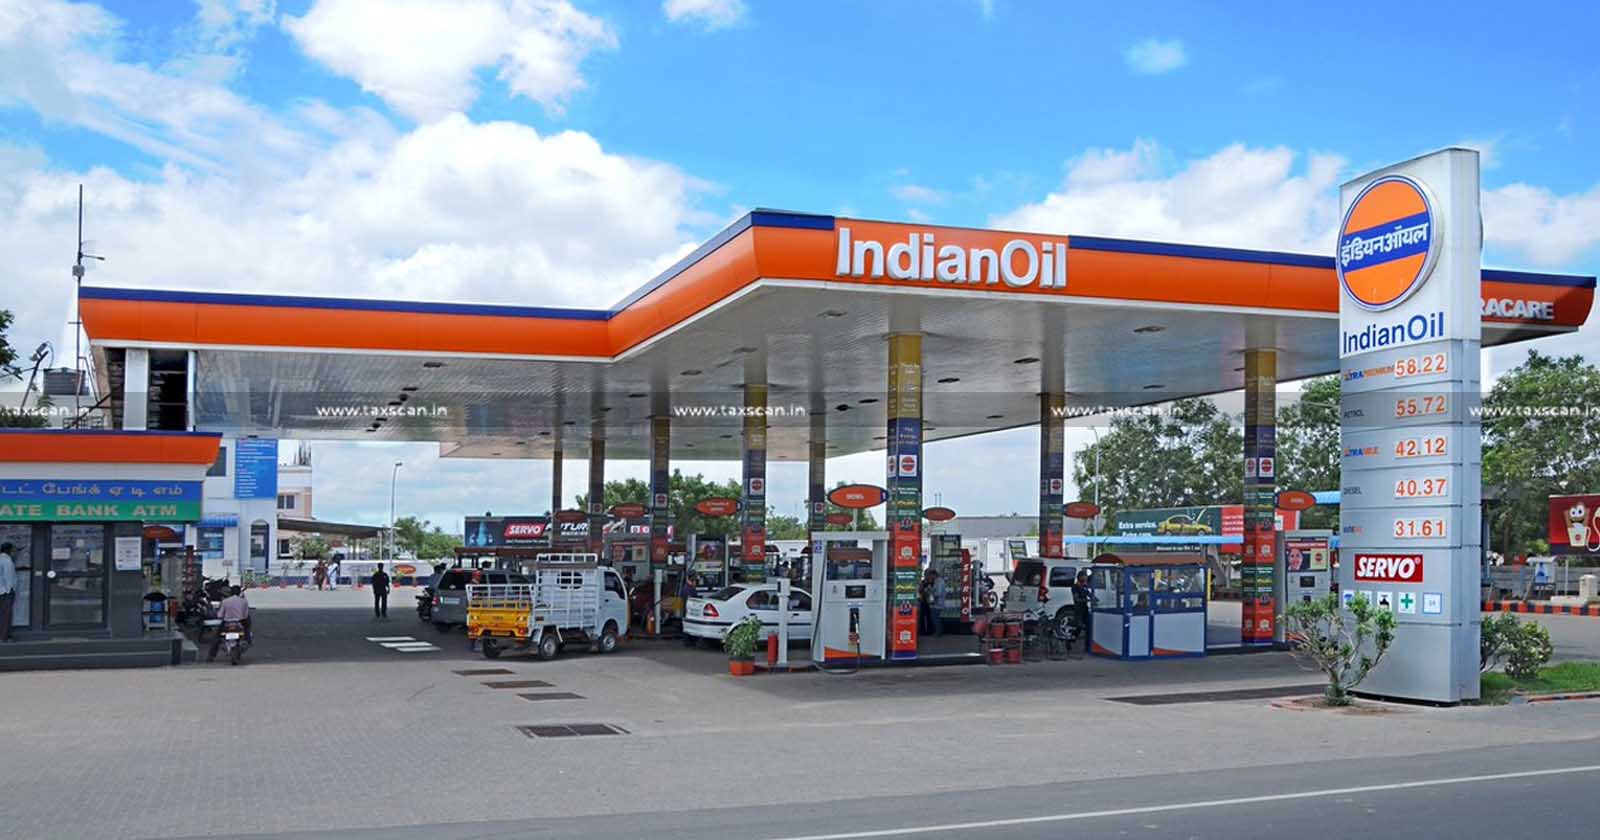 Limitation in Absence limitation provided in Statute - Income Tax Act - Absence limitation - Patna HC Dismisses Appeal Against Indian Oil Corporation - taxscan